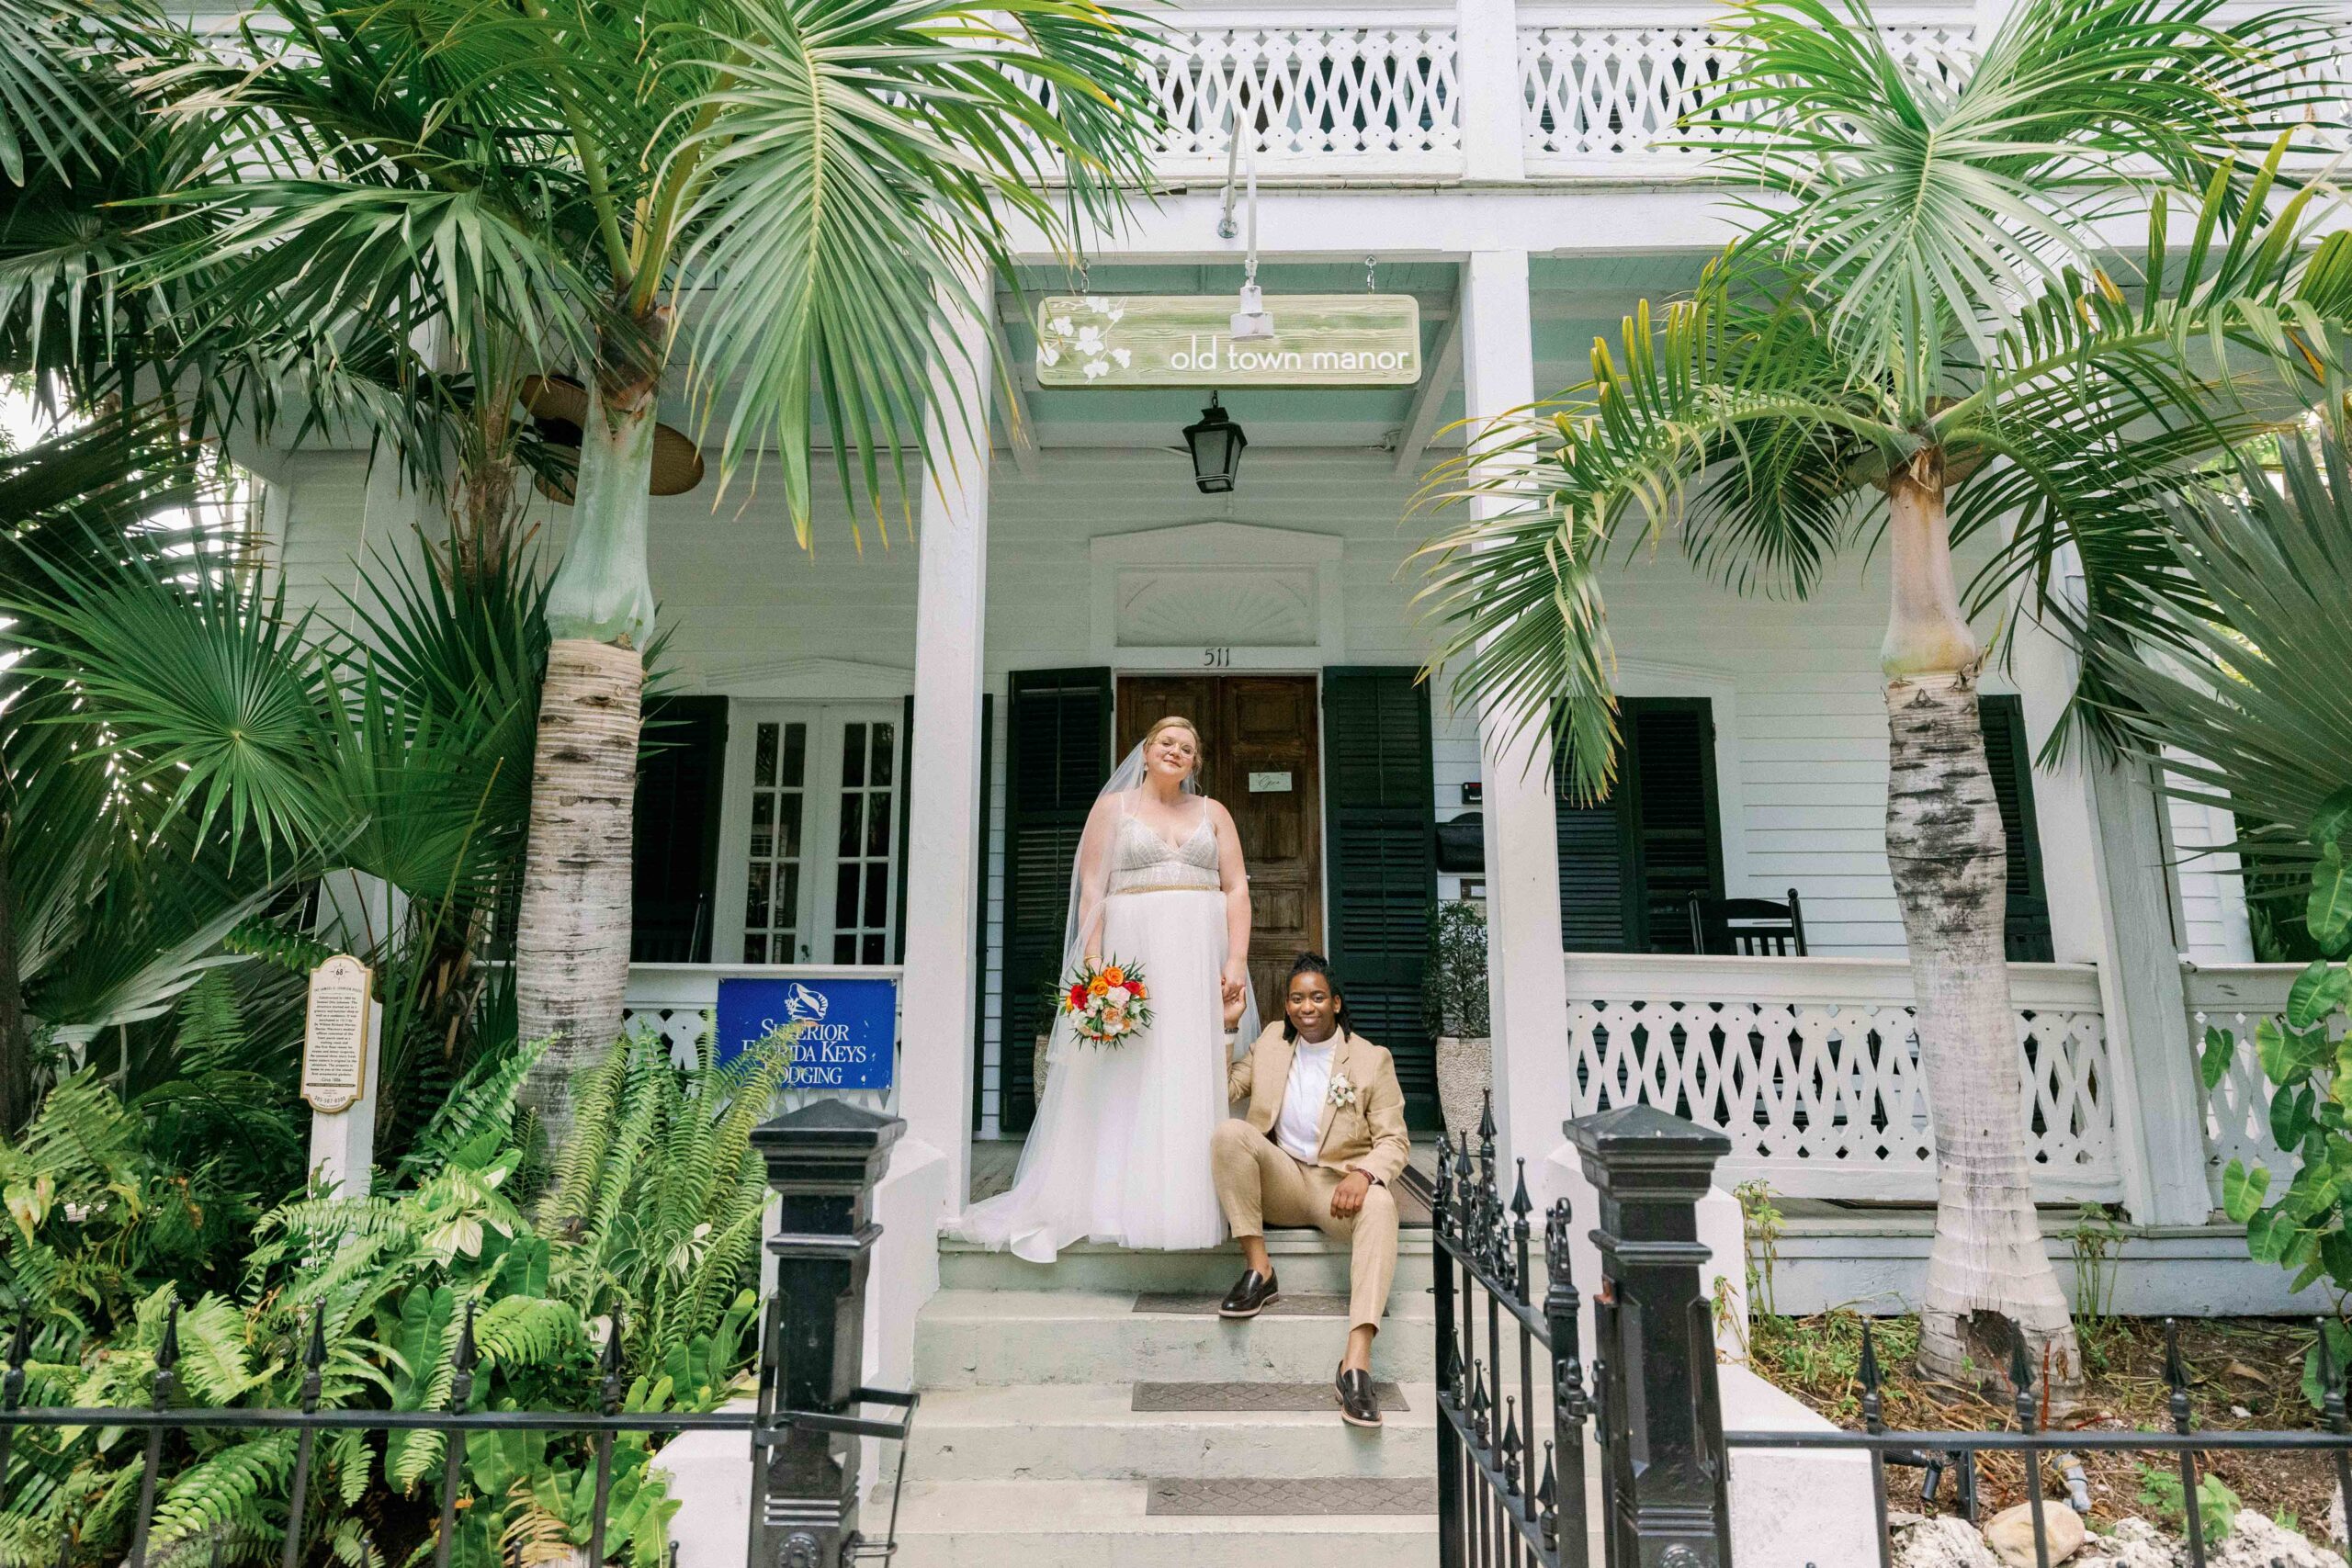 Brides posed in front of their Key West Wedding Venue. Old Town Manor